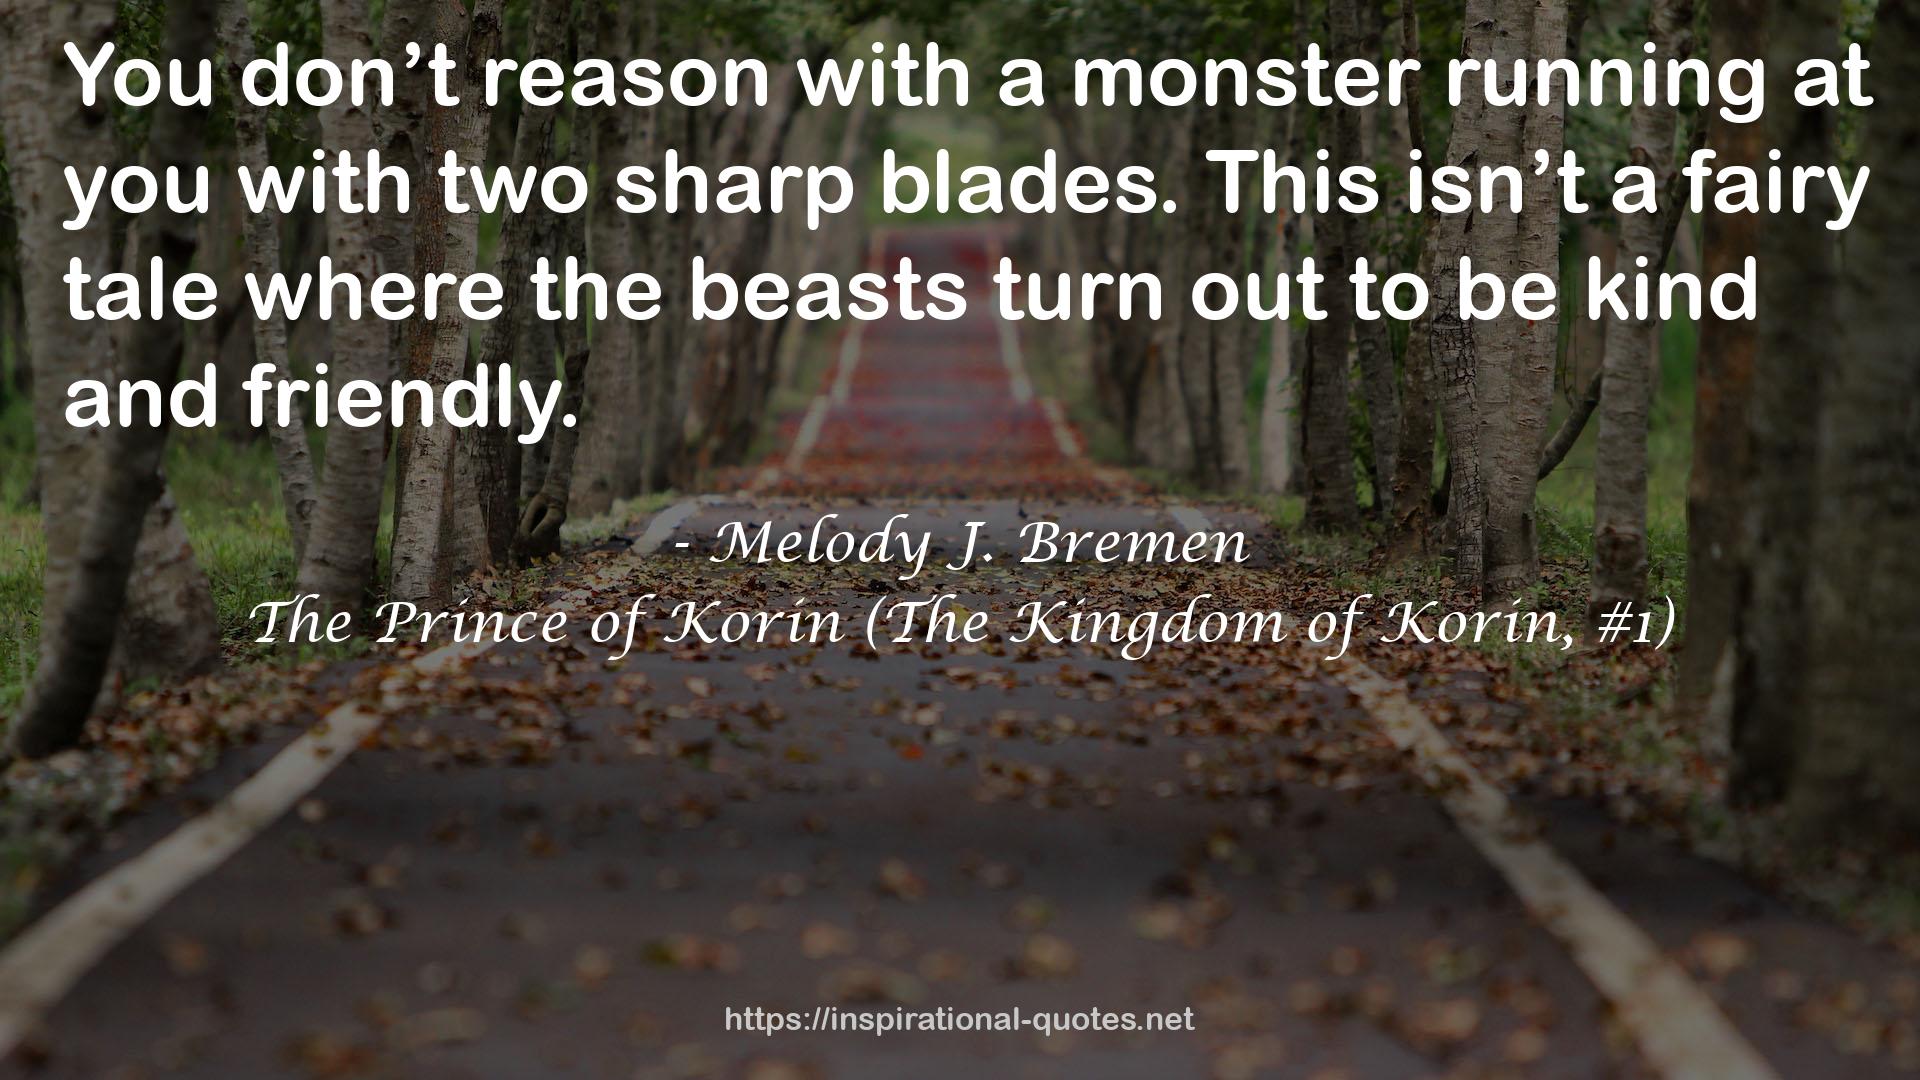 The Prince of Korin (The Kingdom of Korin, #1) QUOTES